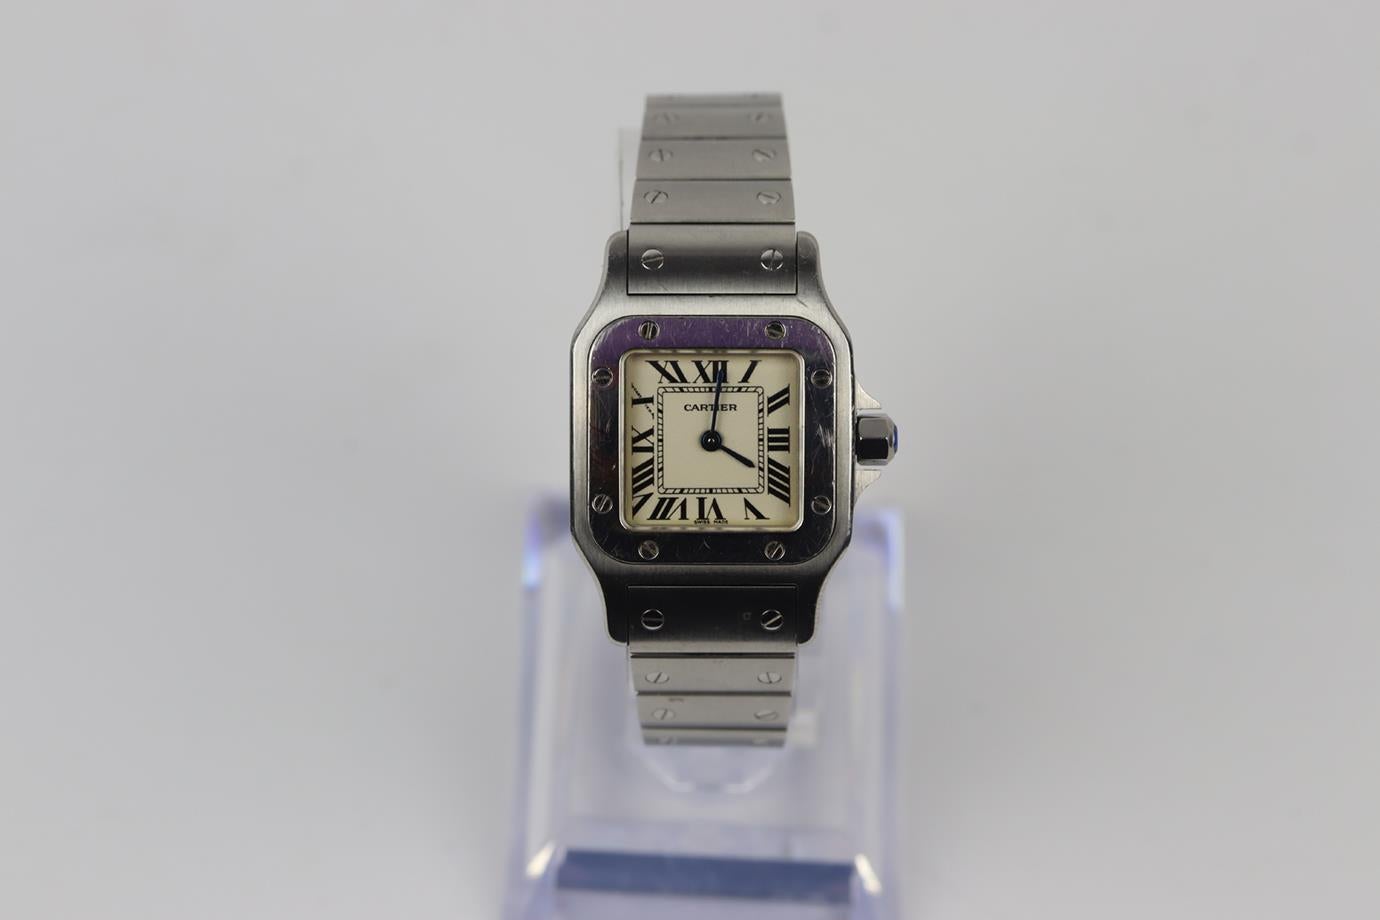 Cartier Santos de Cartier Galbée small stainless steel wrist watch. Silver stainless steel. Quartz movement. Fixed bezel. Silver dial. Butterfly clasp. Comes with box, 5 additional wrist links, certificate and handbook. Case Diameter: 23 mm. Case